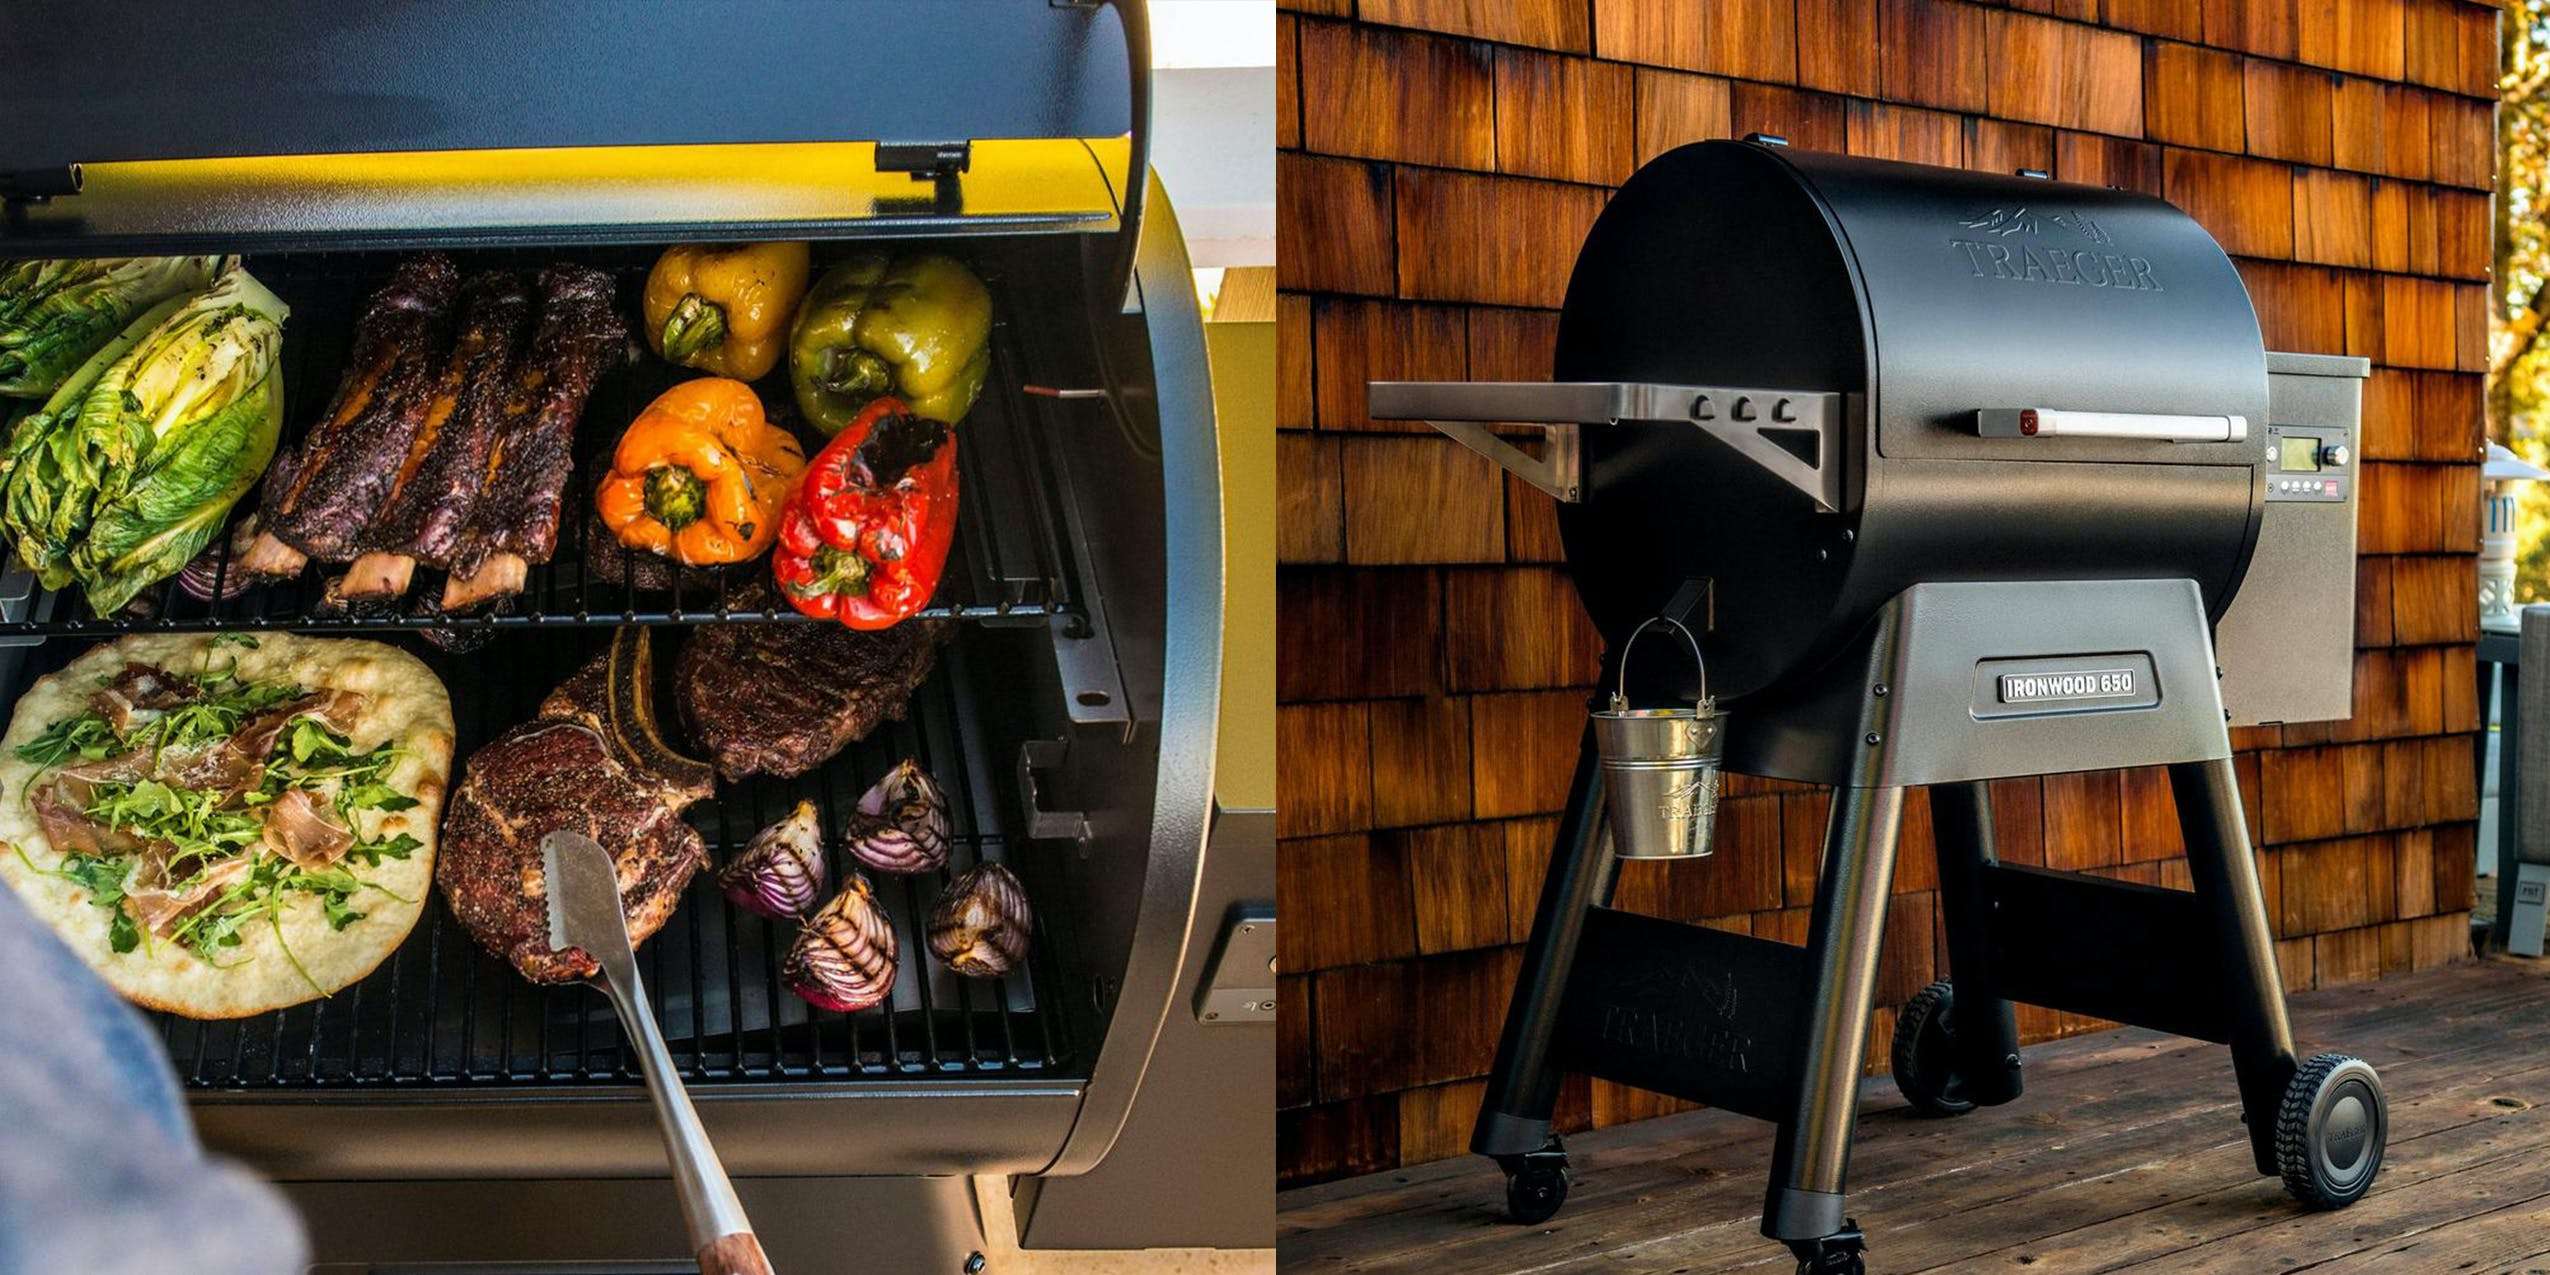 Traeger Ironwood 885 Review: Is this pellet grill worth it?